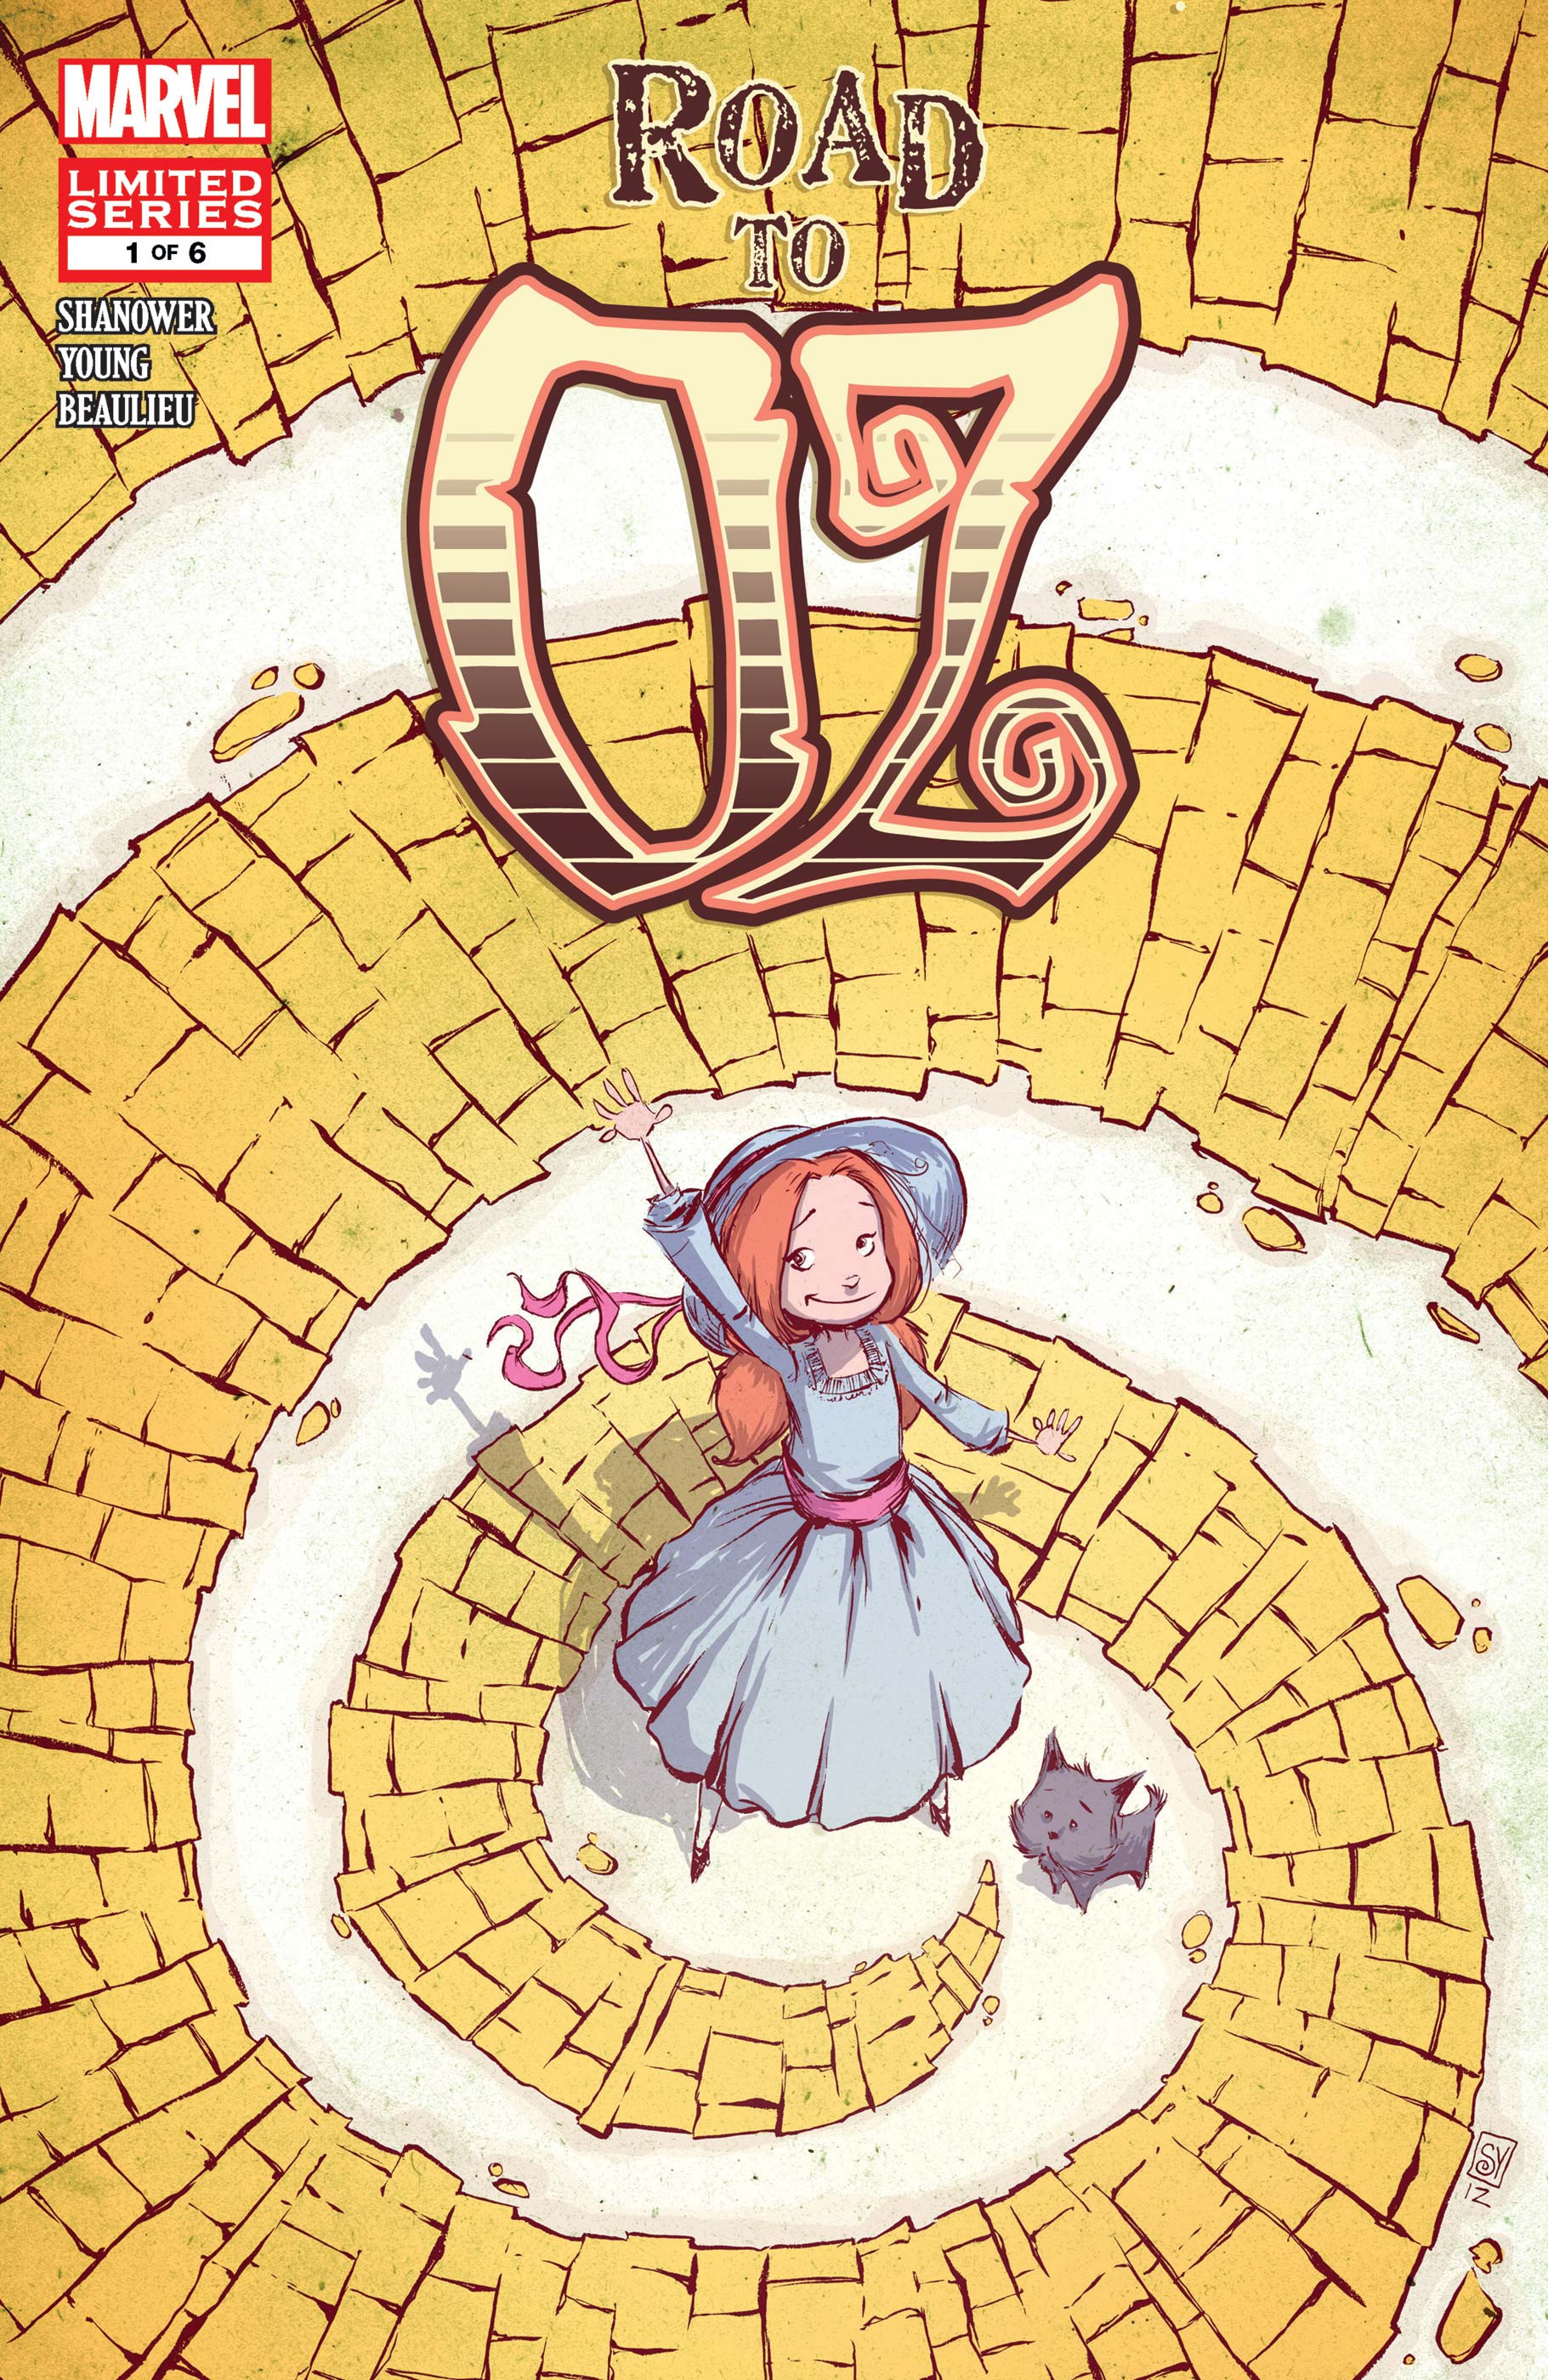 Road to Oz (2011) #1